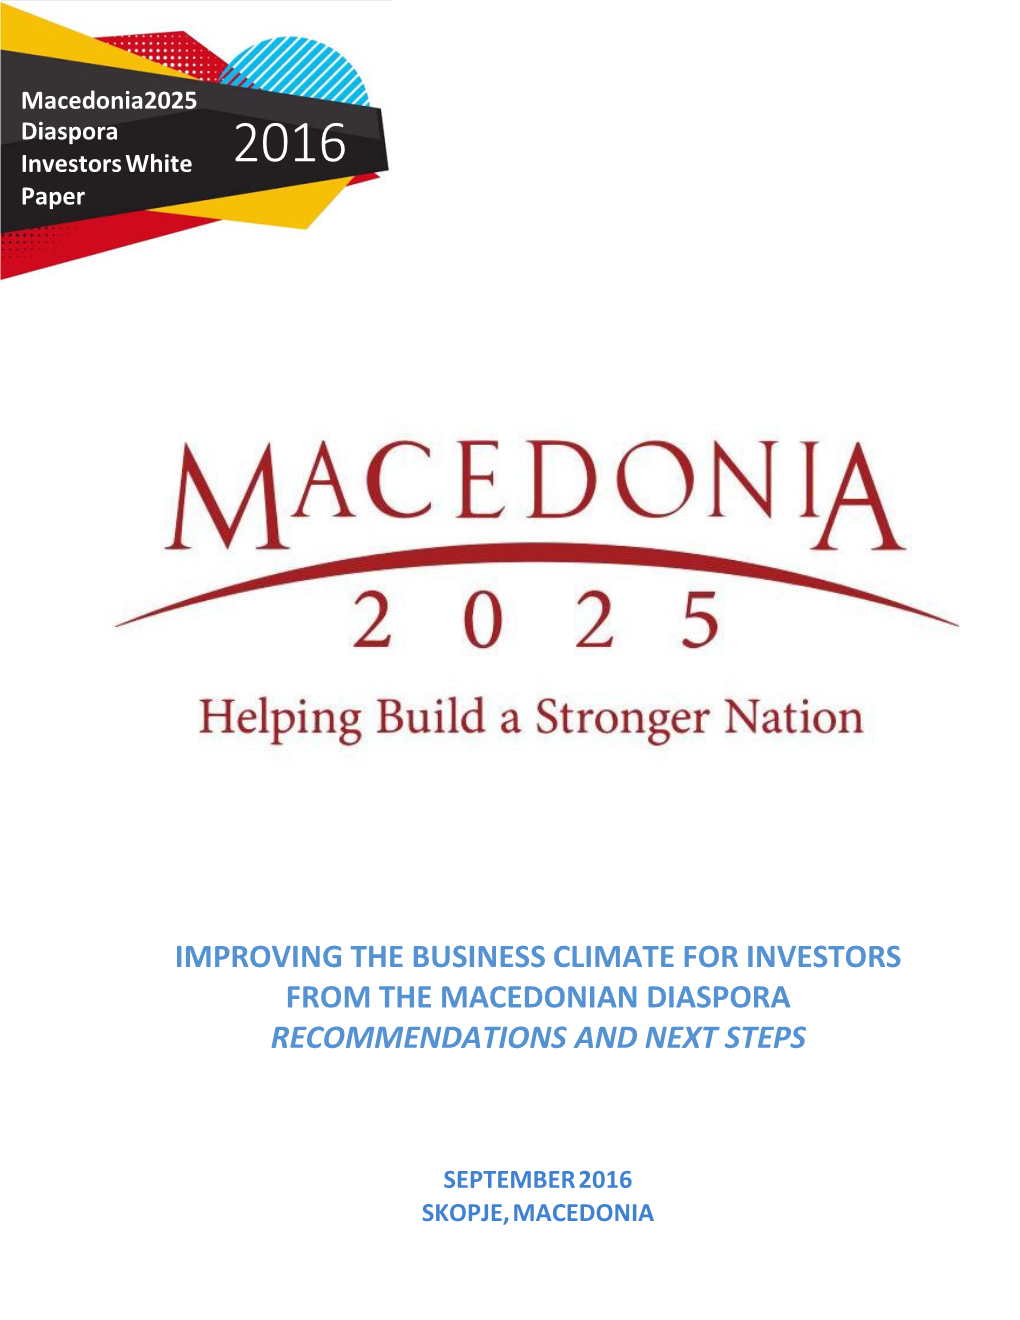 Improving the Business Climate for Investors from the Macedonian Diaspora Recommendations and Next Steps